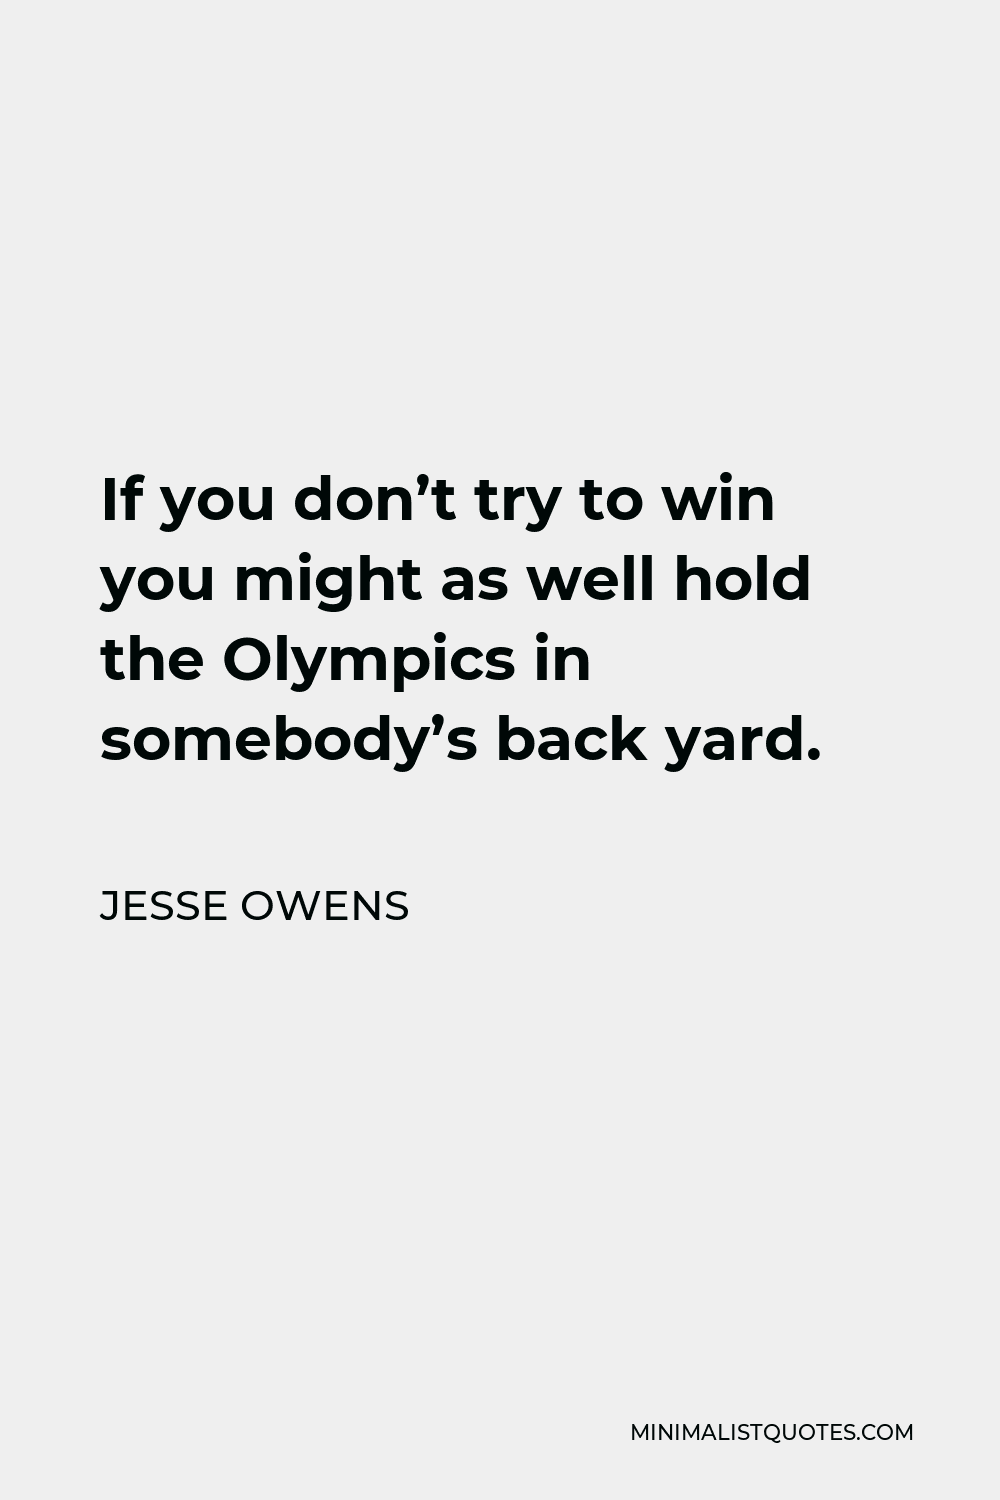 Jesse Owens Quote - If you don’t try to win you might as well hold the Olympics in somebody’s back yard. The thrill of competing carries with it the thrill of a gold medal. One wants to win to prove himself the best.